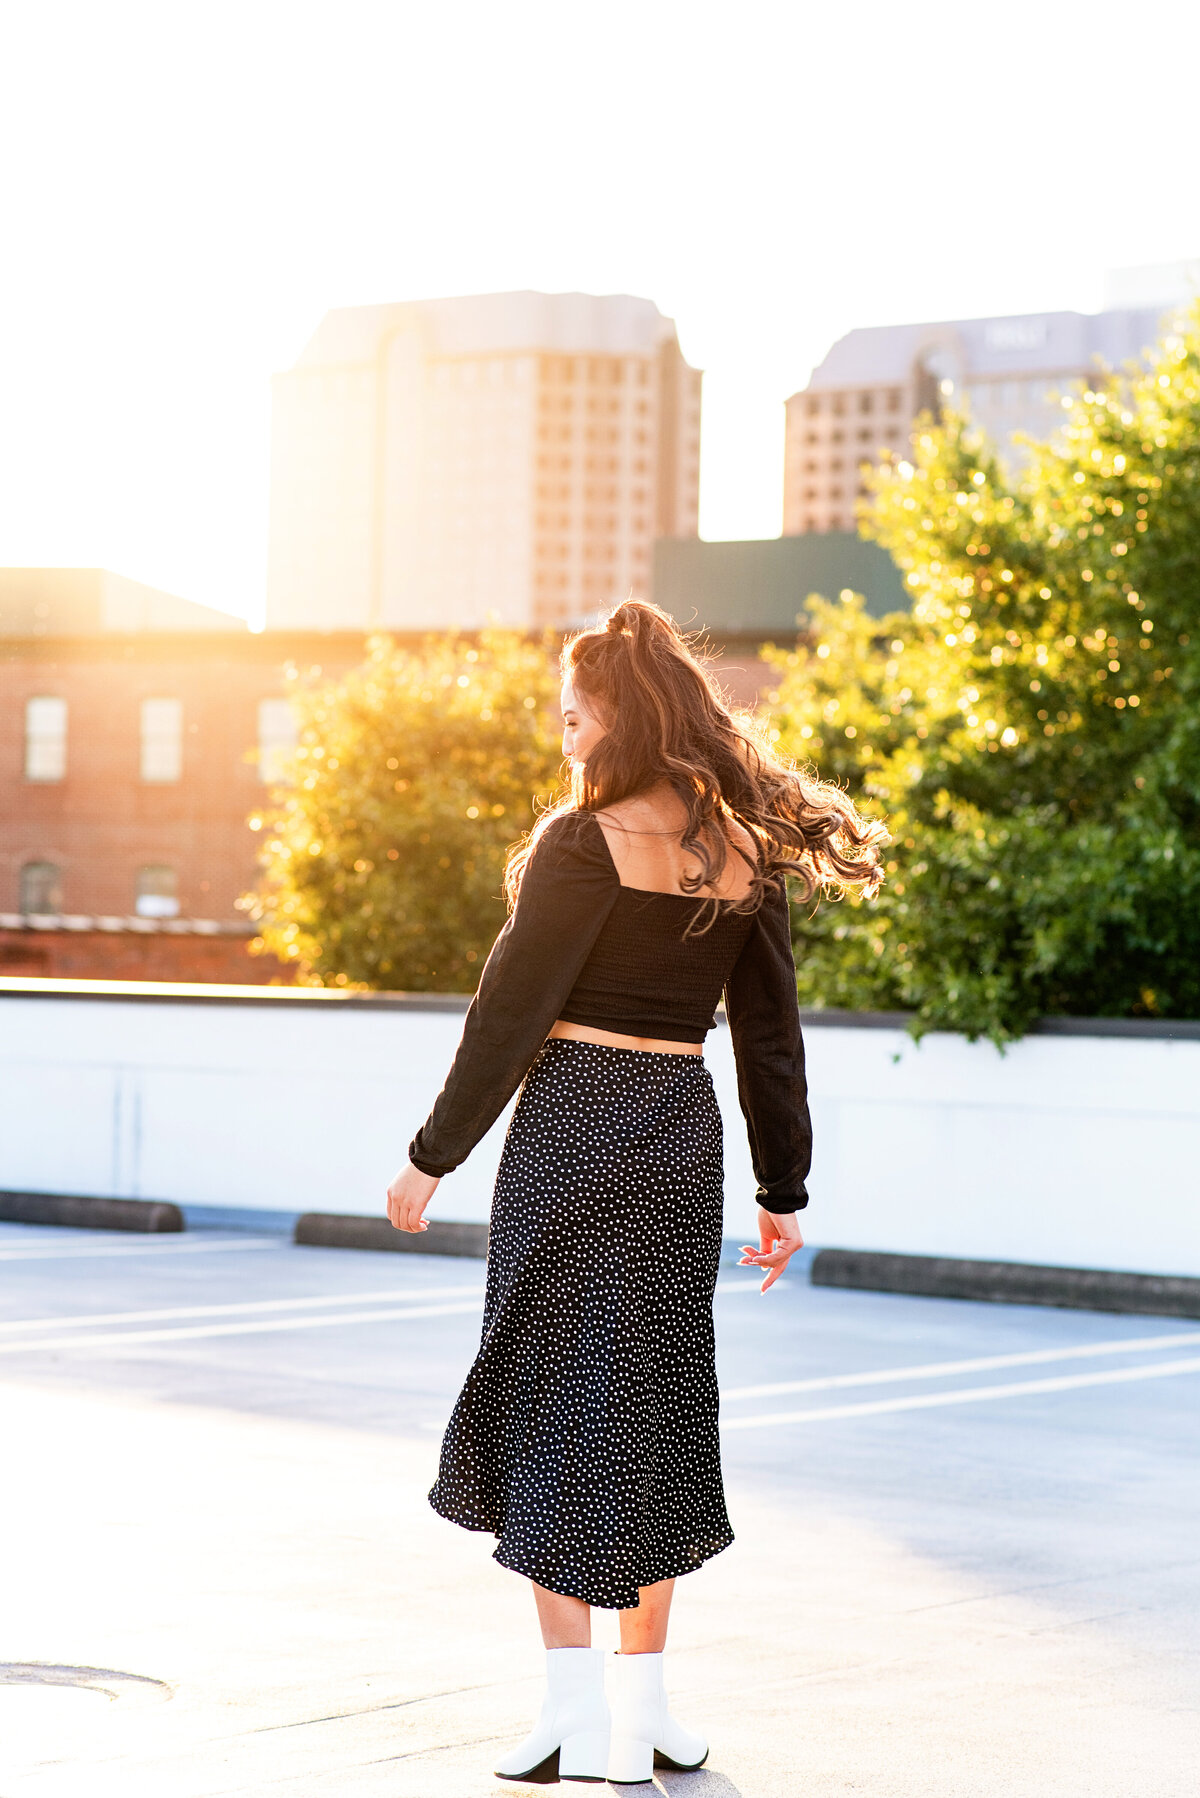 Rva senior girl twirls on rooftop at sunset during her senior pictures.